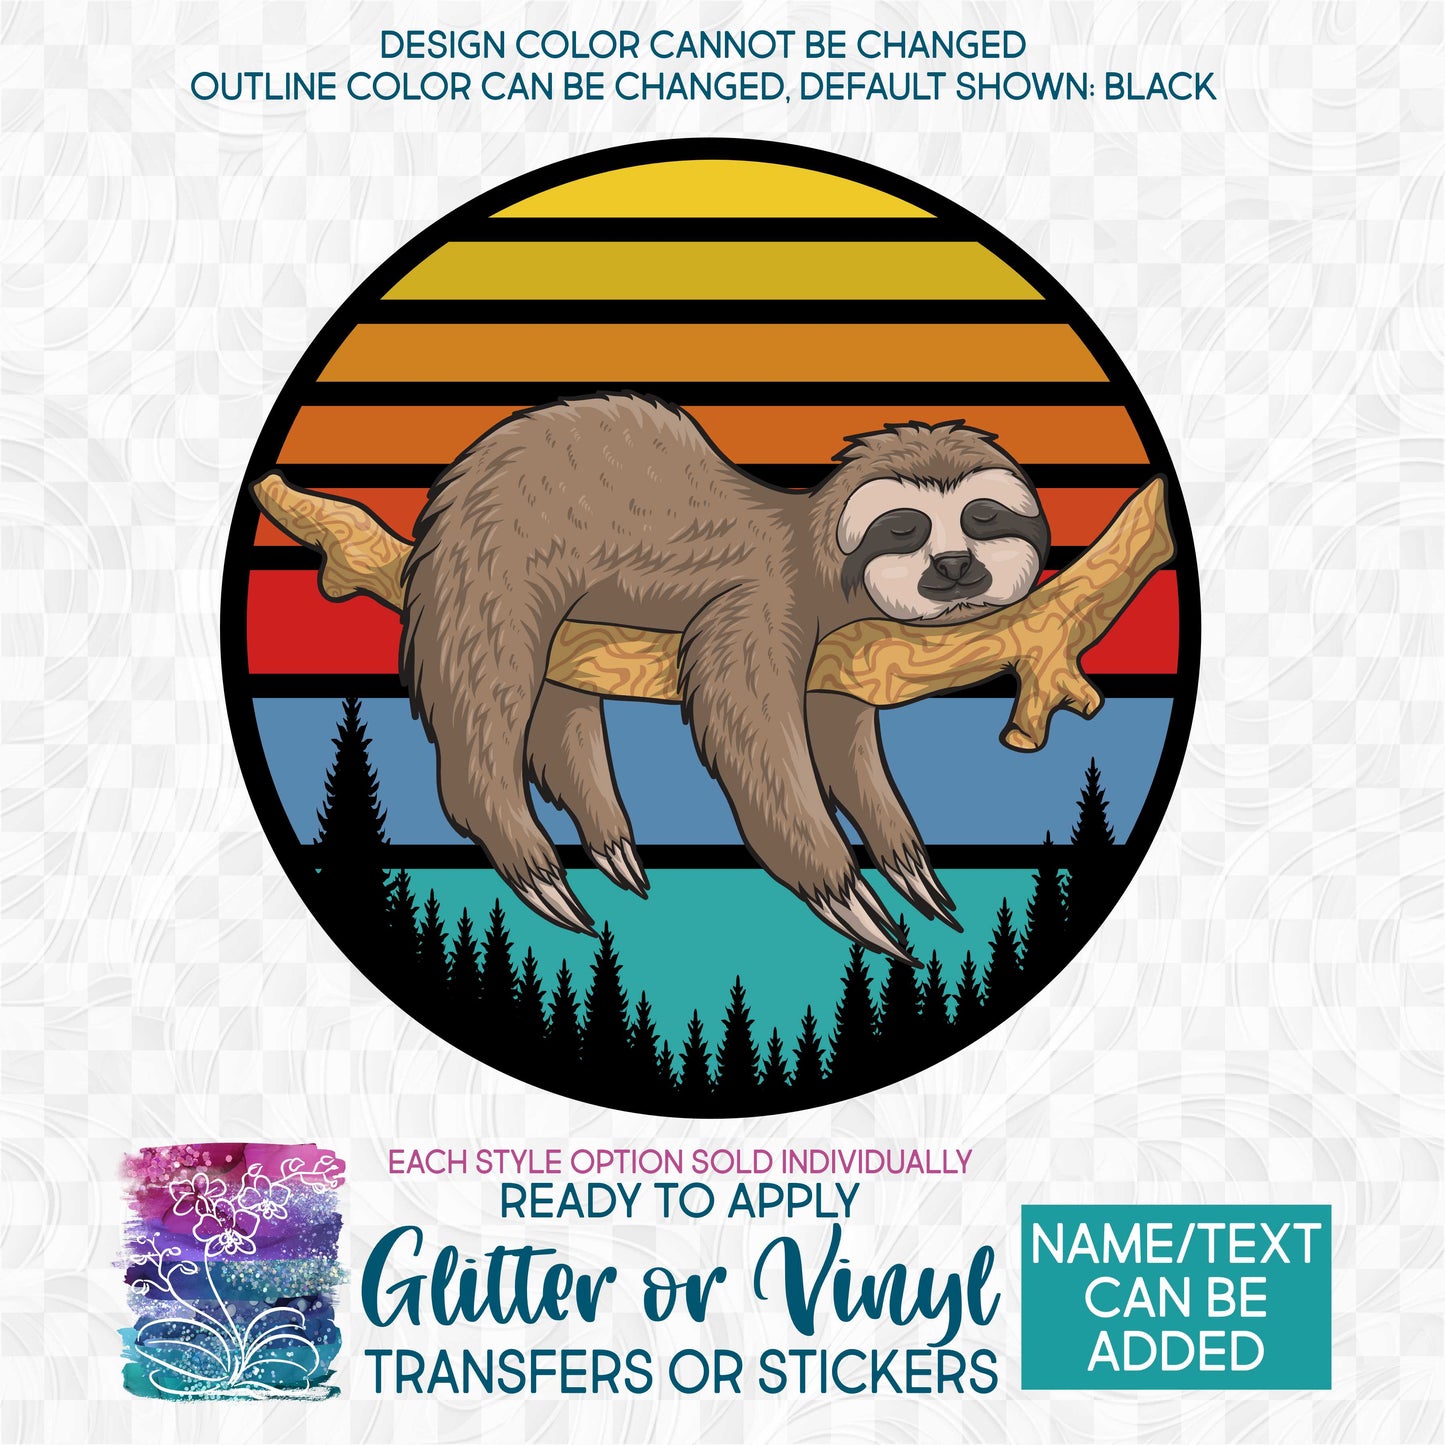 SBS-117-A1 Retro Sunset Sloth Made-to-Order Iron-On Transfer or Sticker